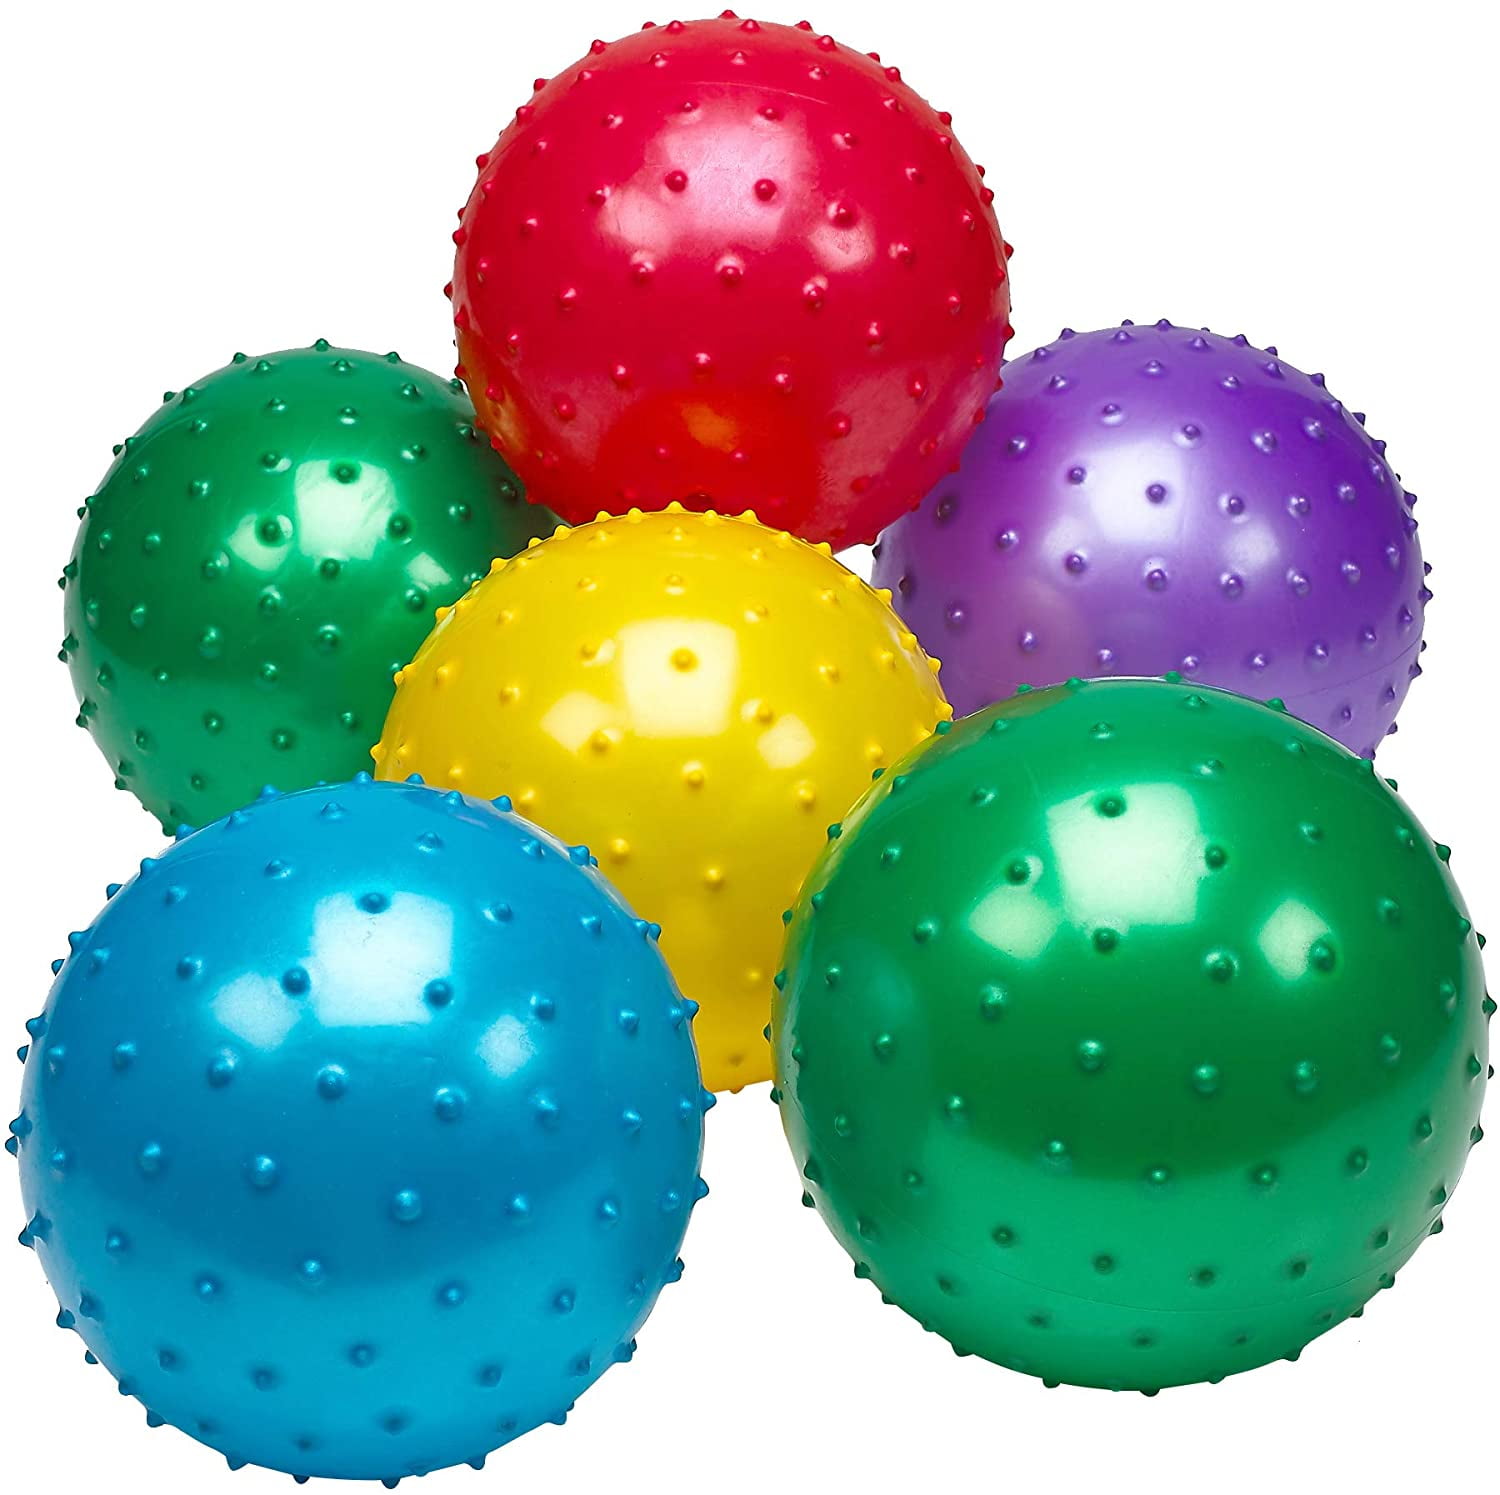 New Knobby Bouncy 5" Balls w/PUMP Spike Massage Party PINATA STUFF 6 Colors 